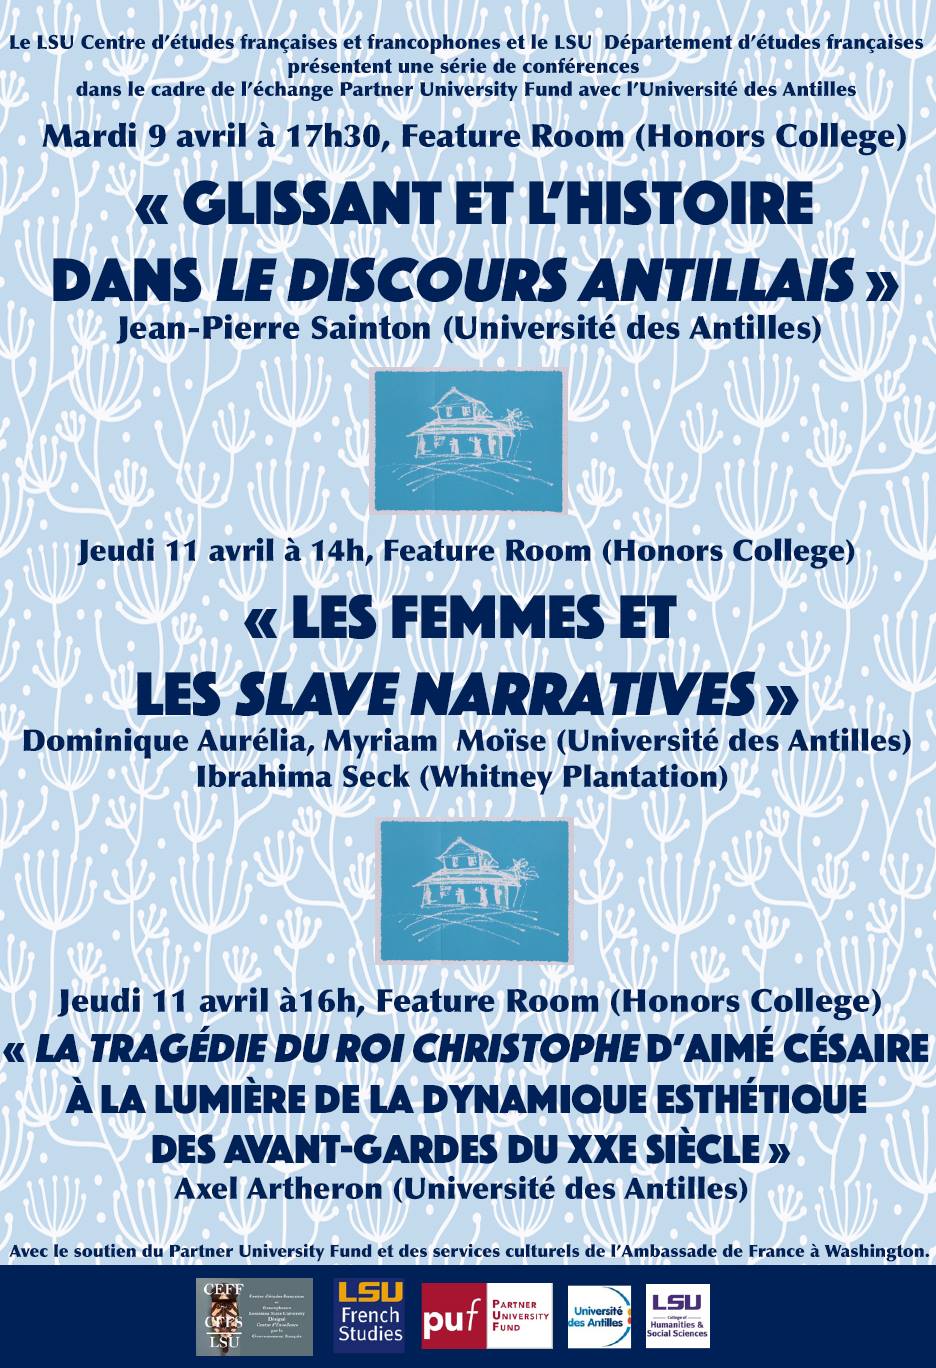 Poster announcing three lectures on April 9th and April 11th 2019, by professors from the Université des Antilles